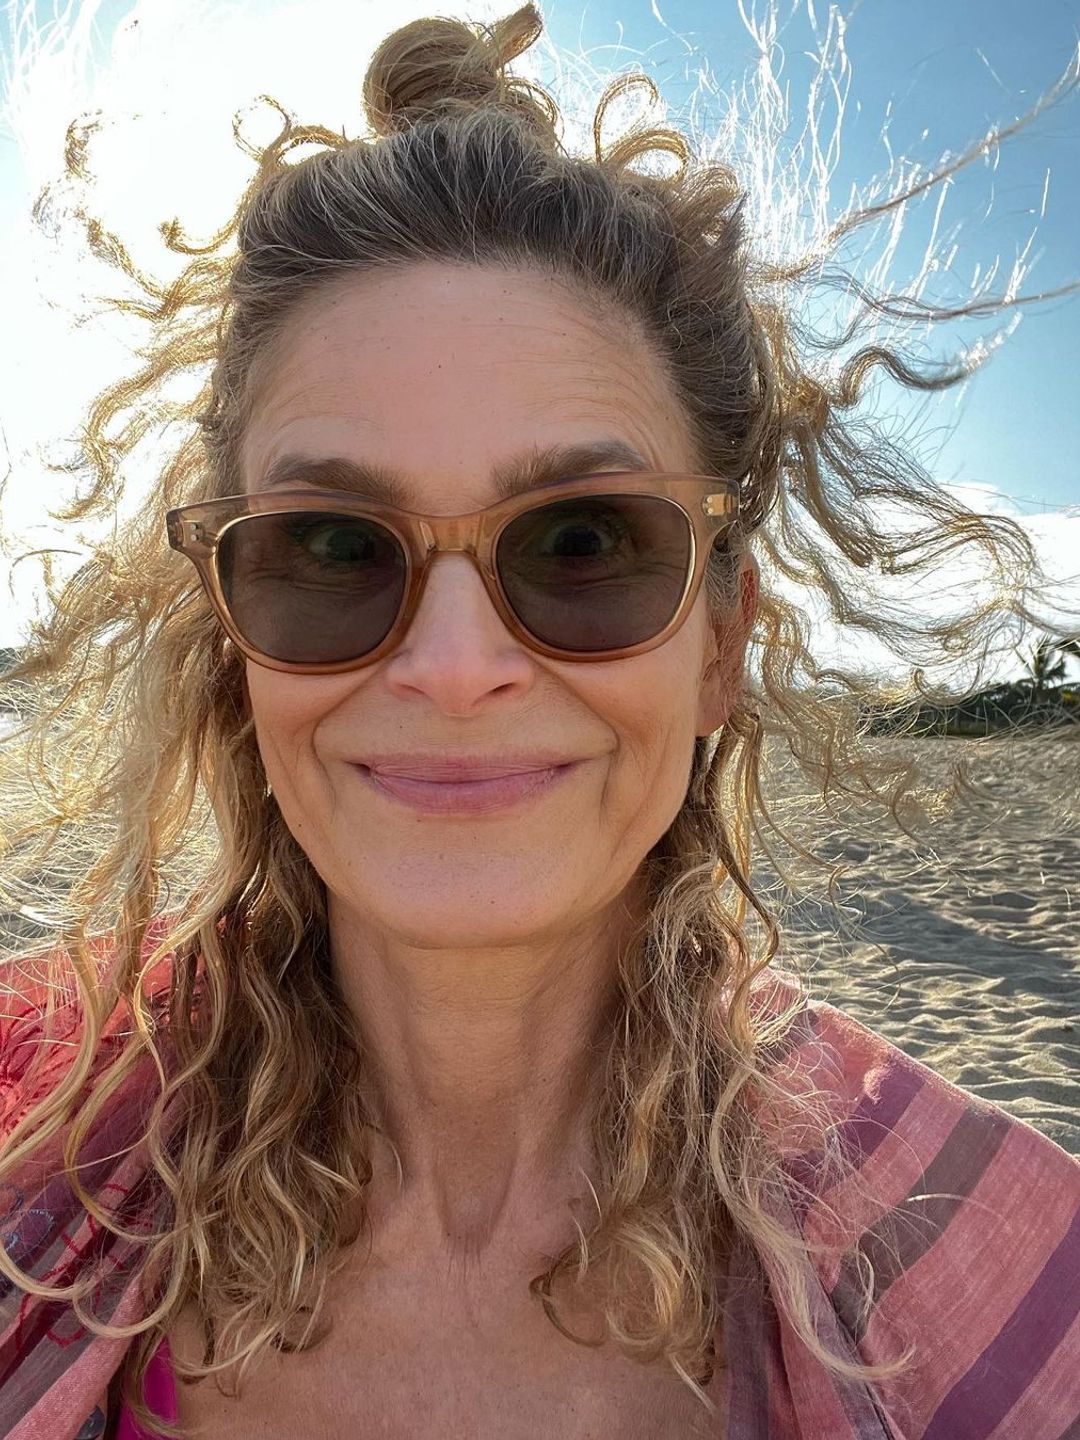 Kyra Sedgwick smiling at the camera with her blowing behind her at the beach